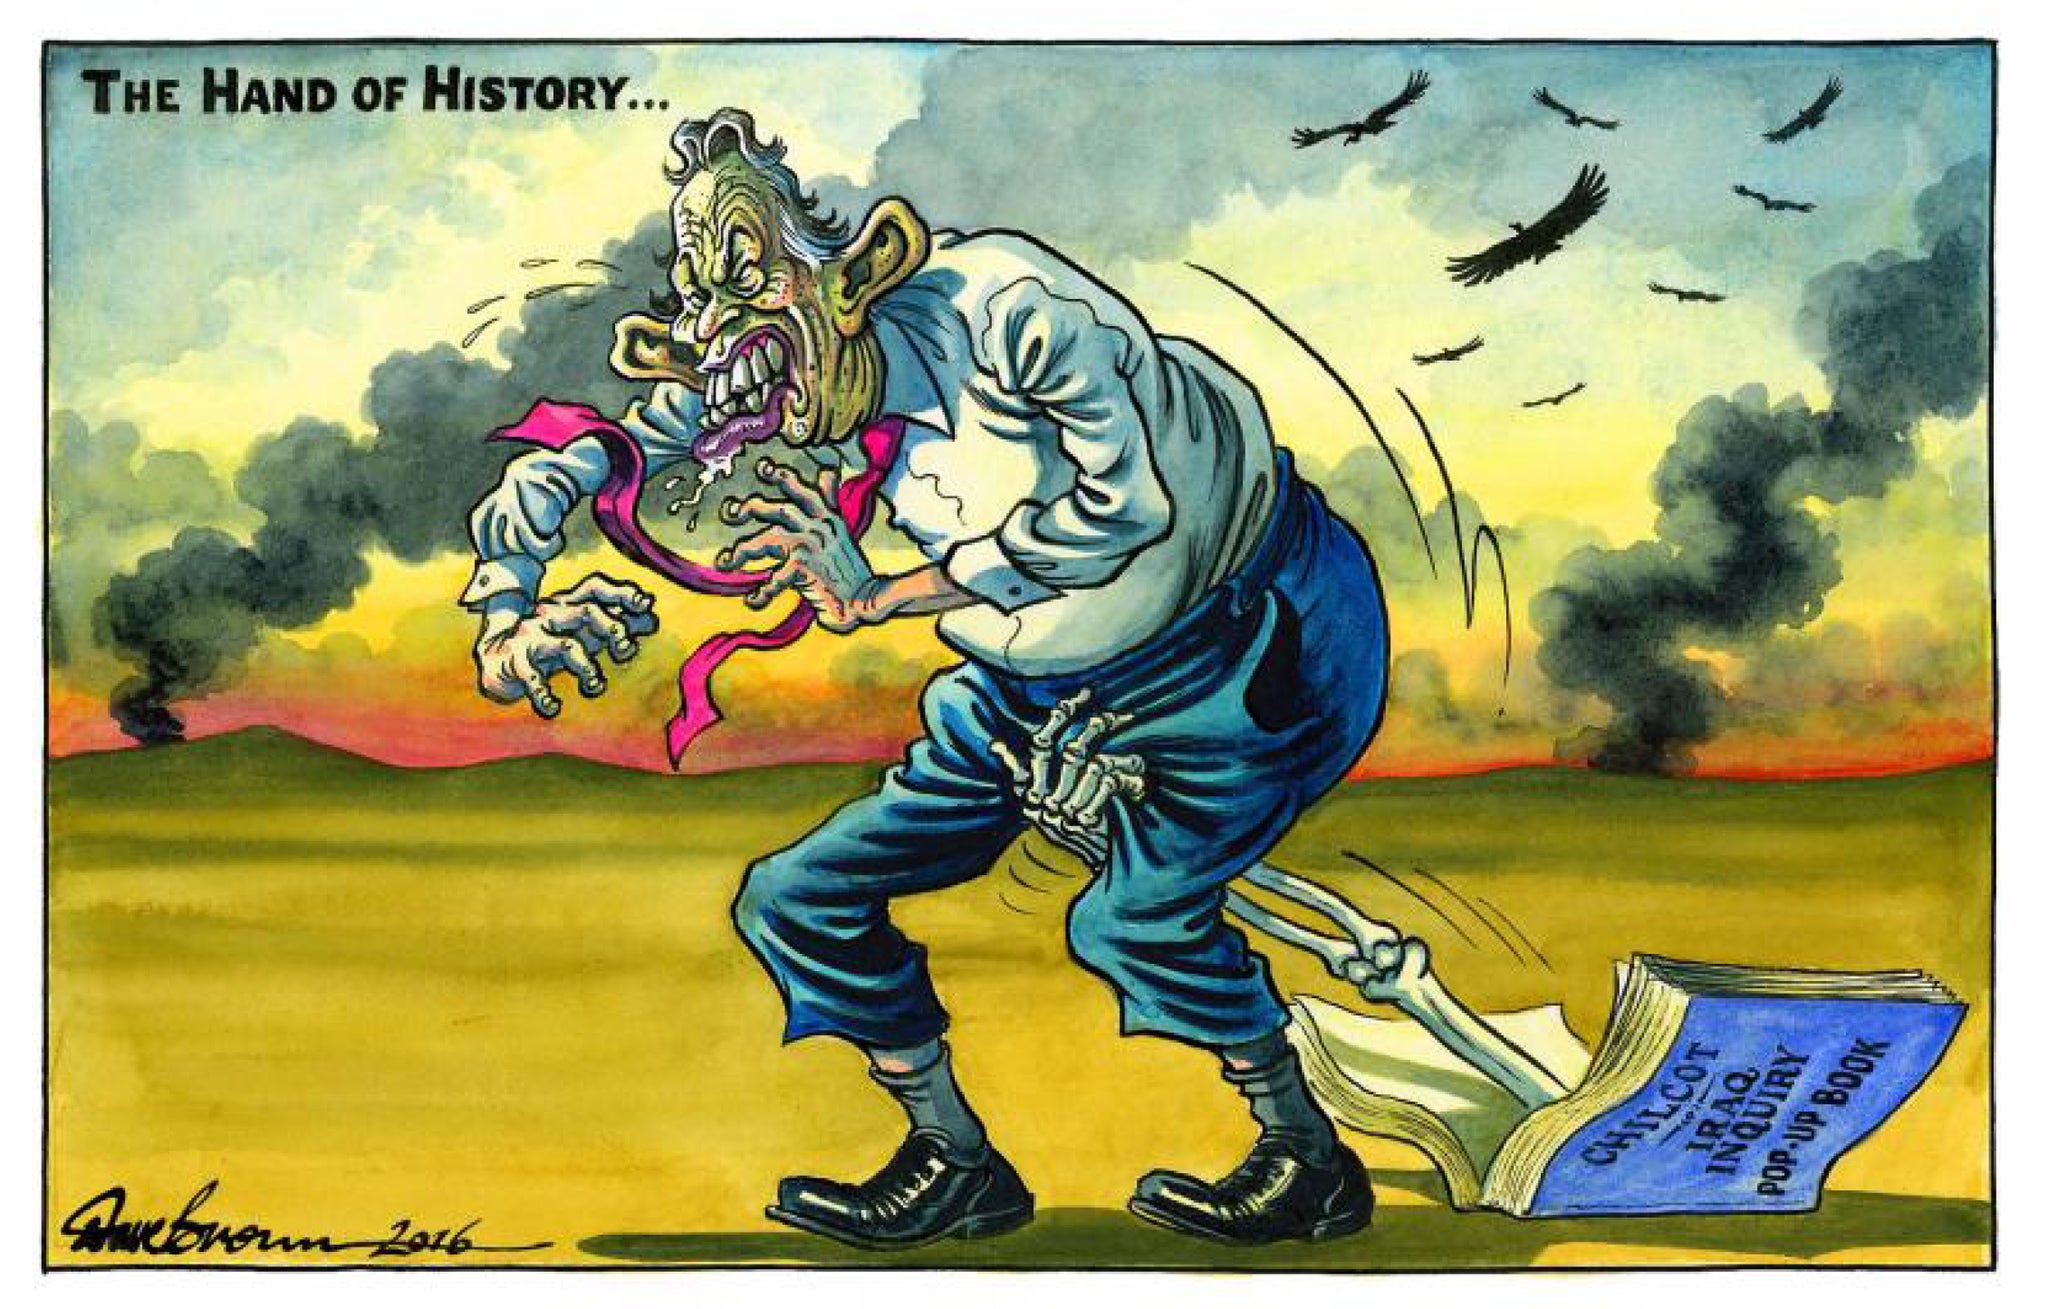 Cartoonist Dave Brown’s take on the Chilcot report in 2016